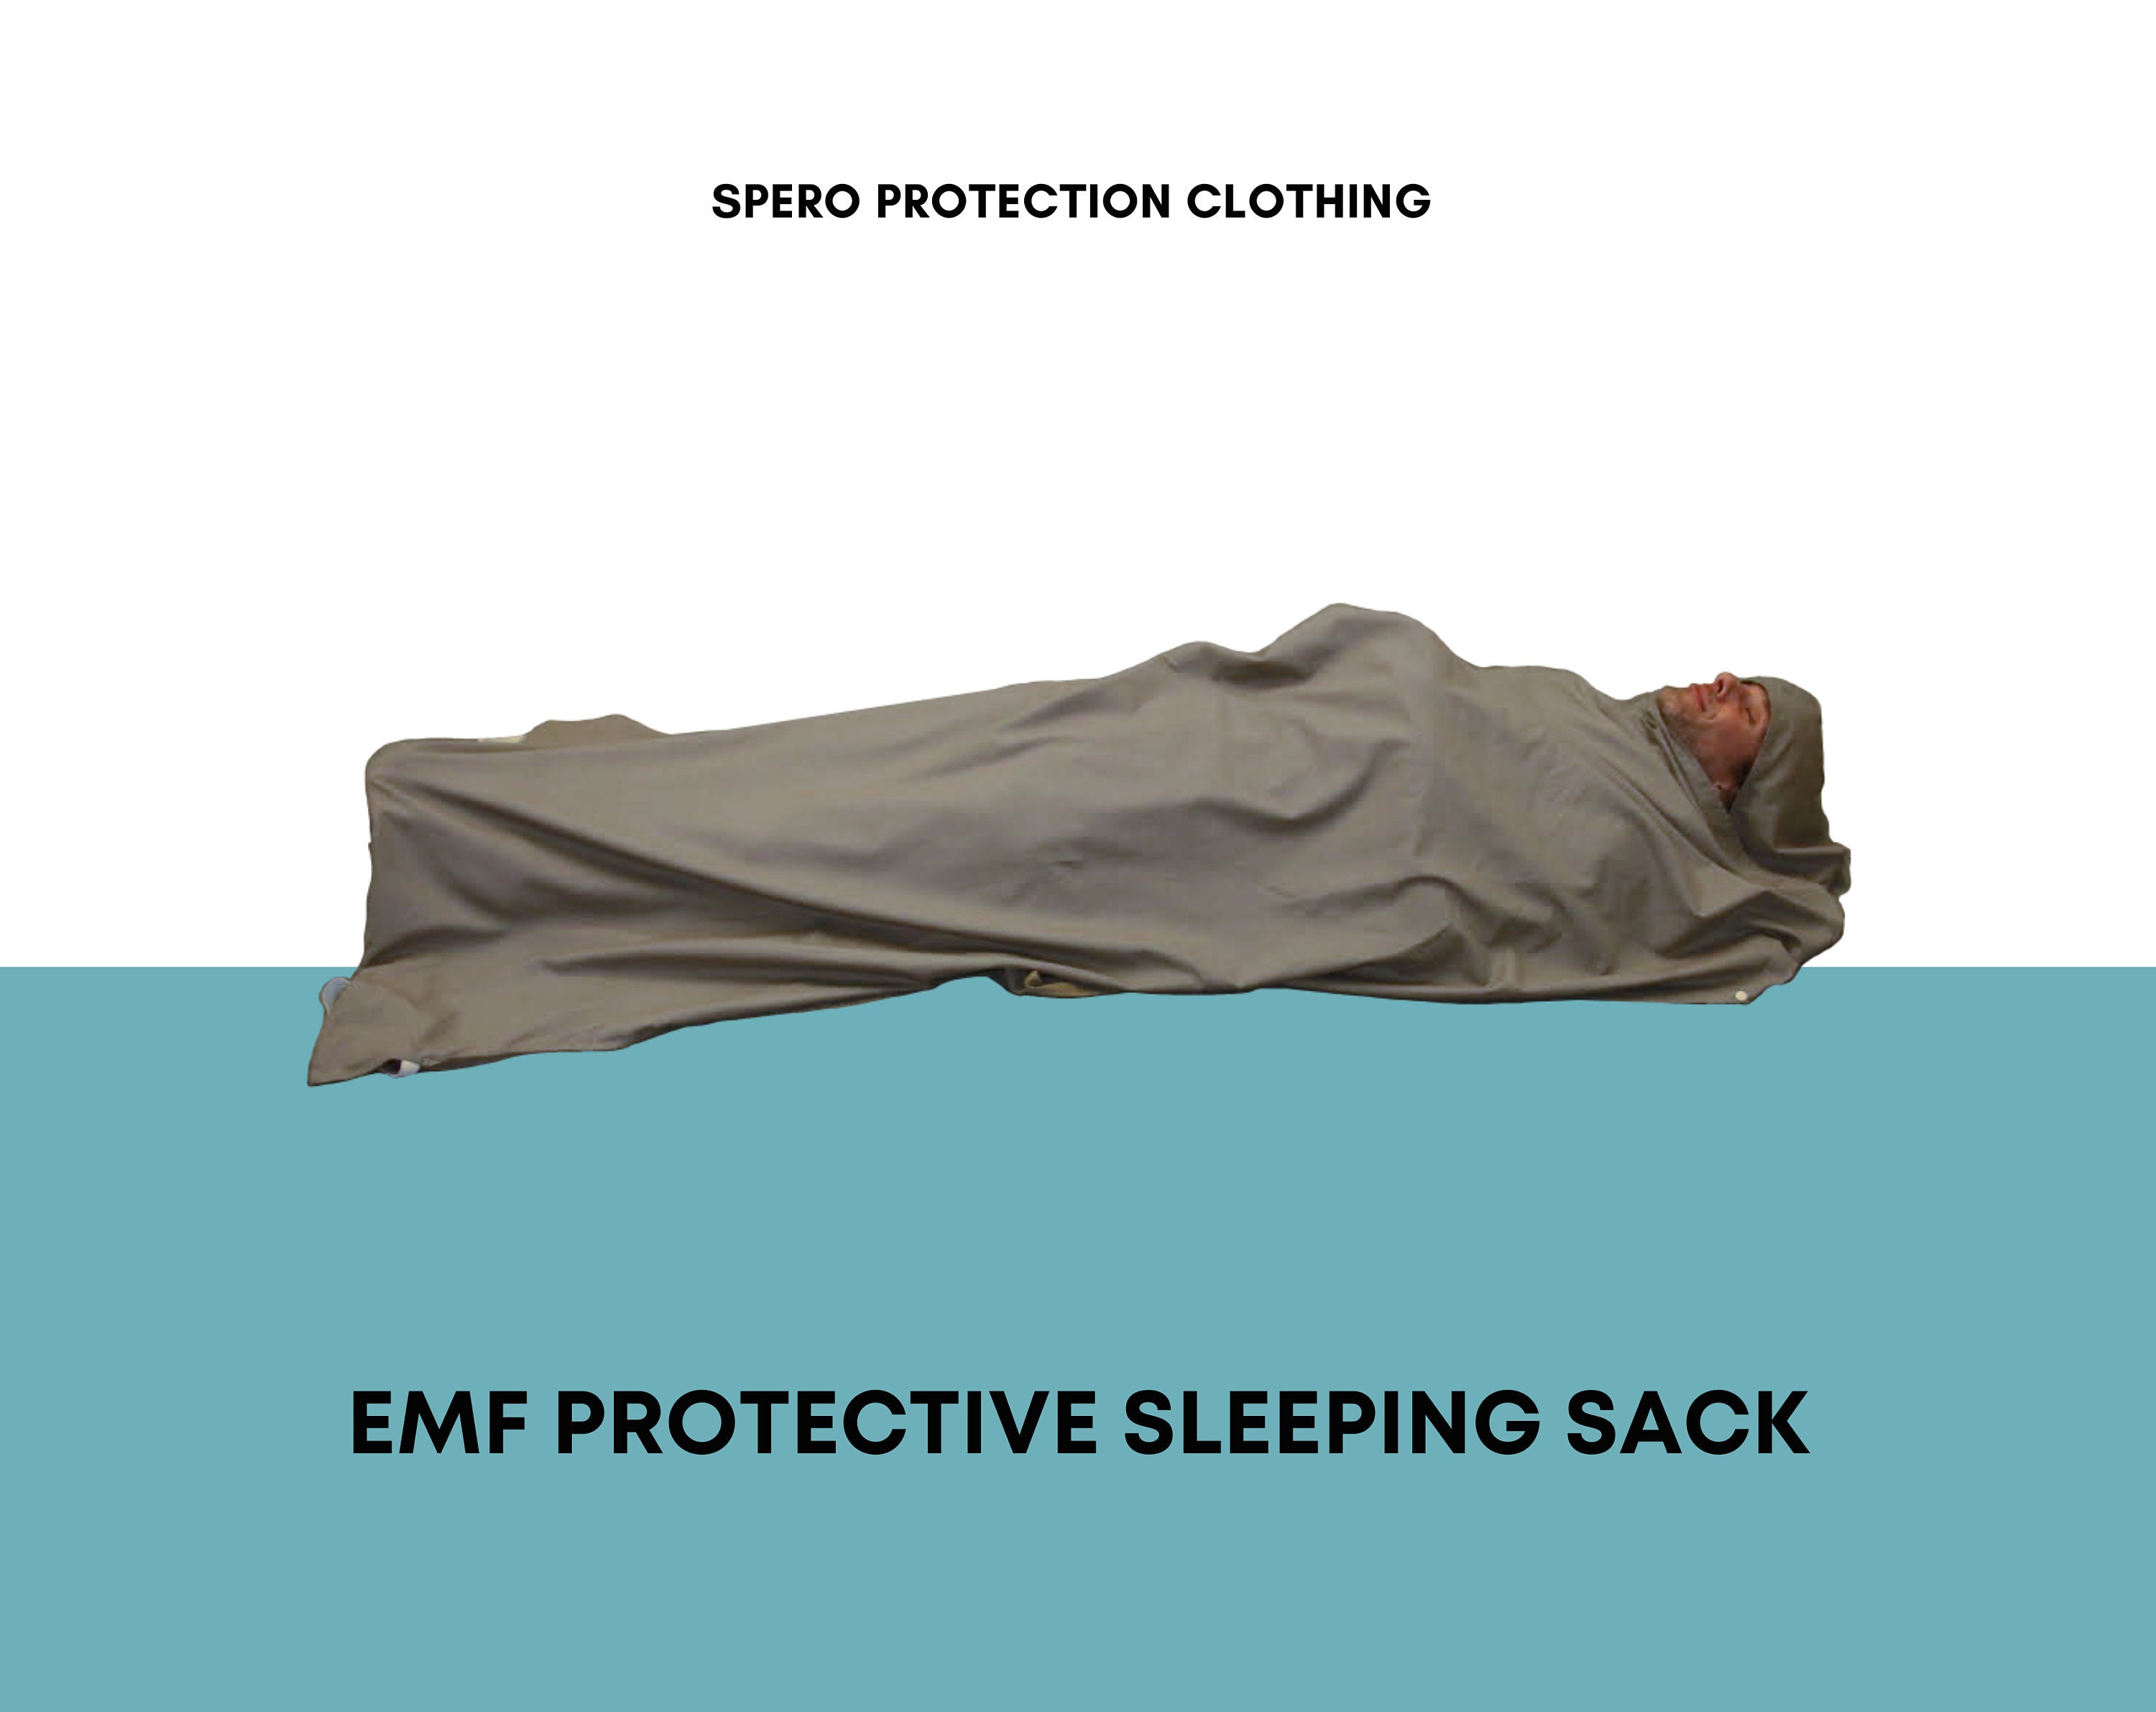 Spero EMF Protection Clothing (@sperogear) • Instagram photos and videos